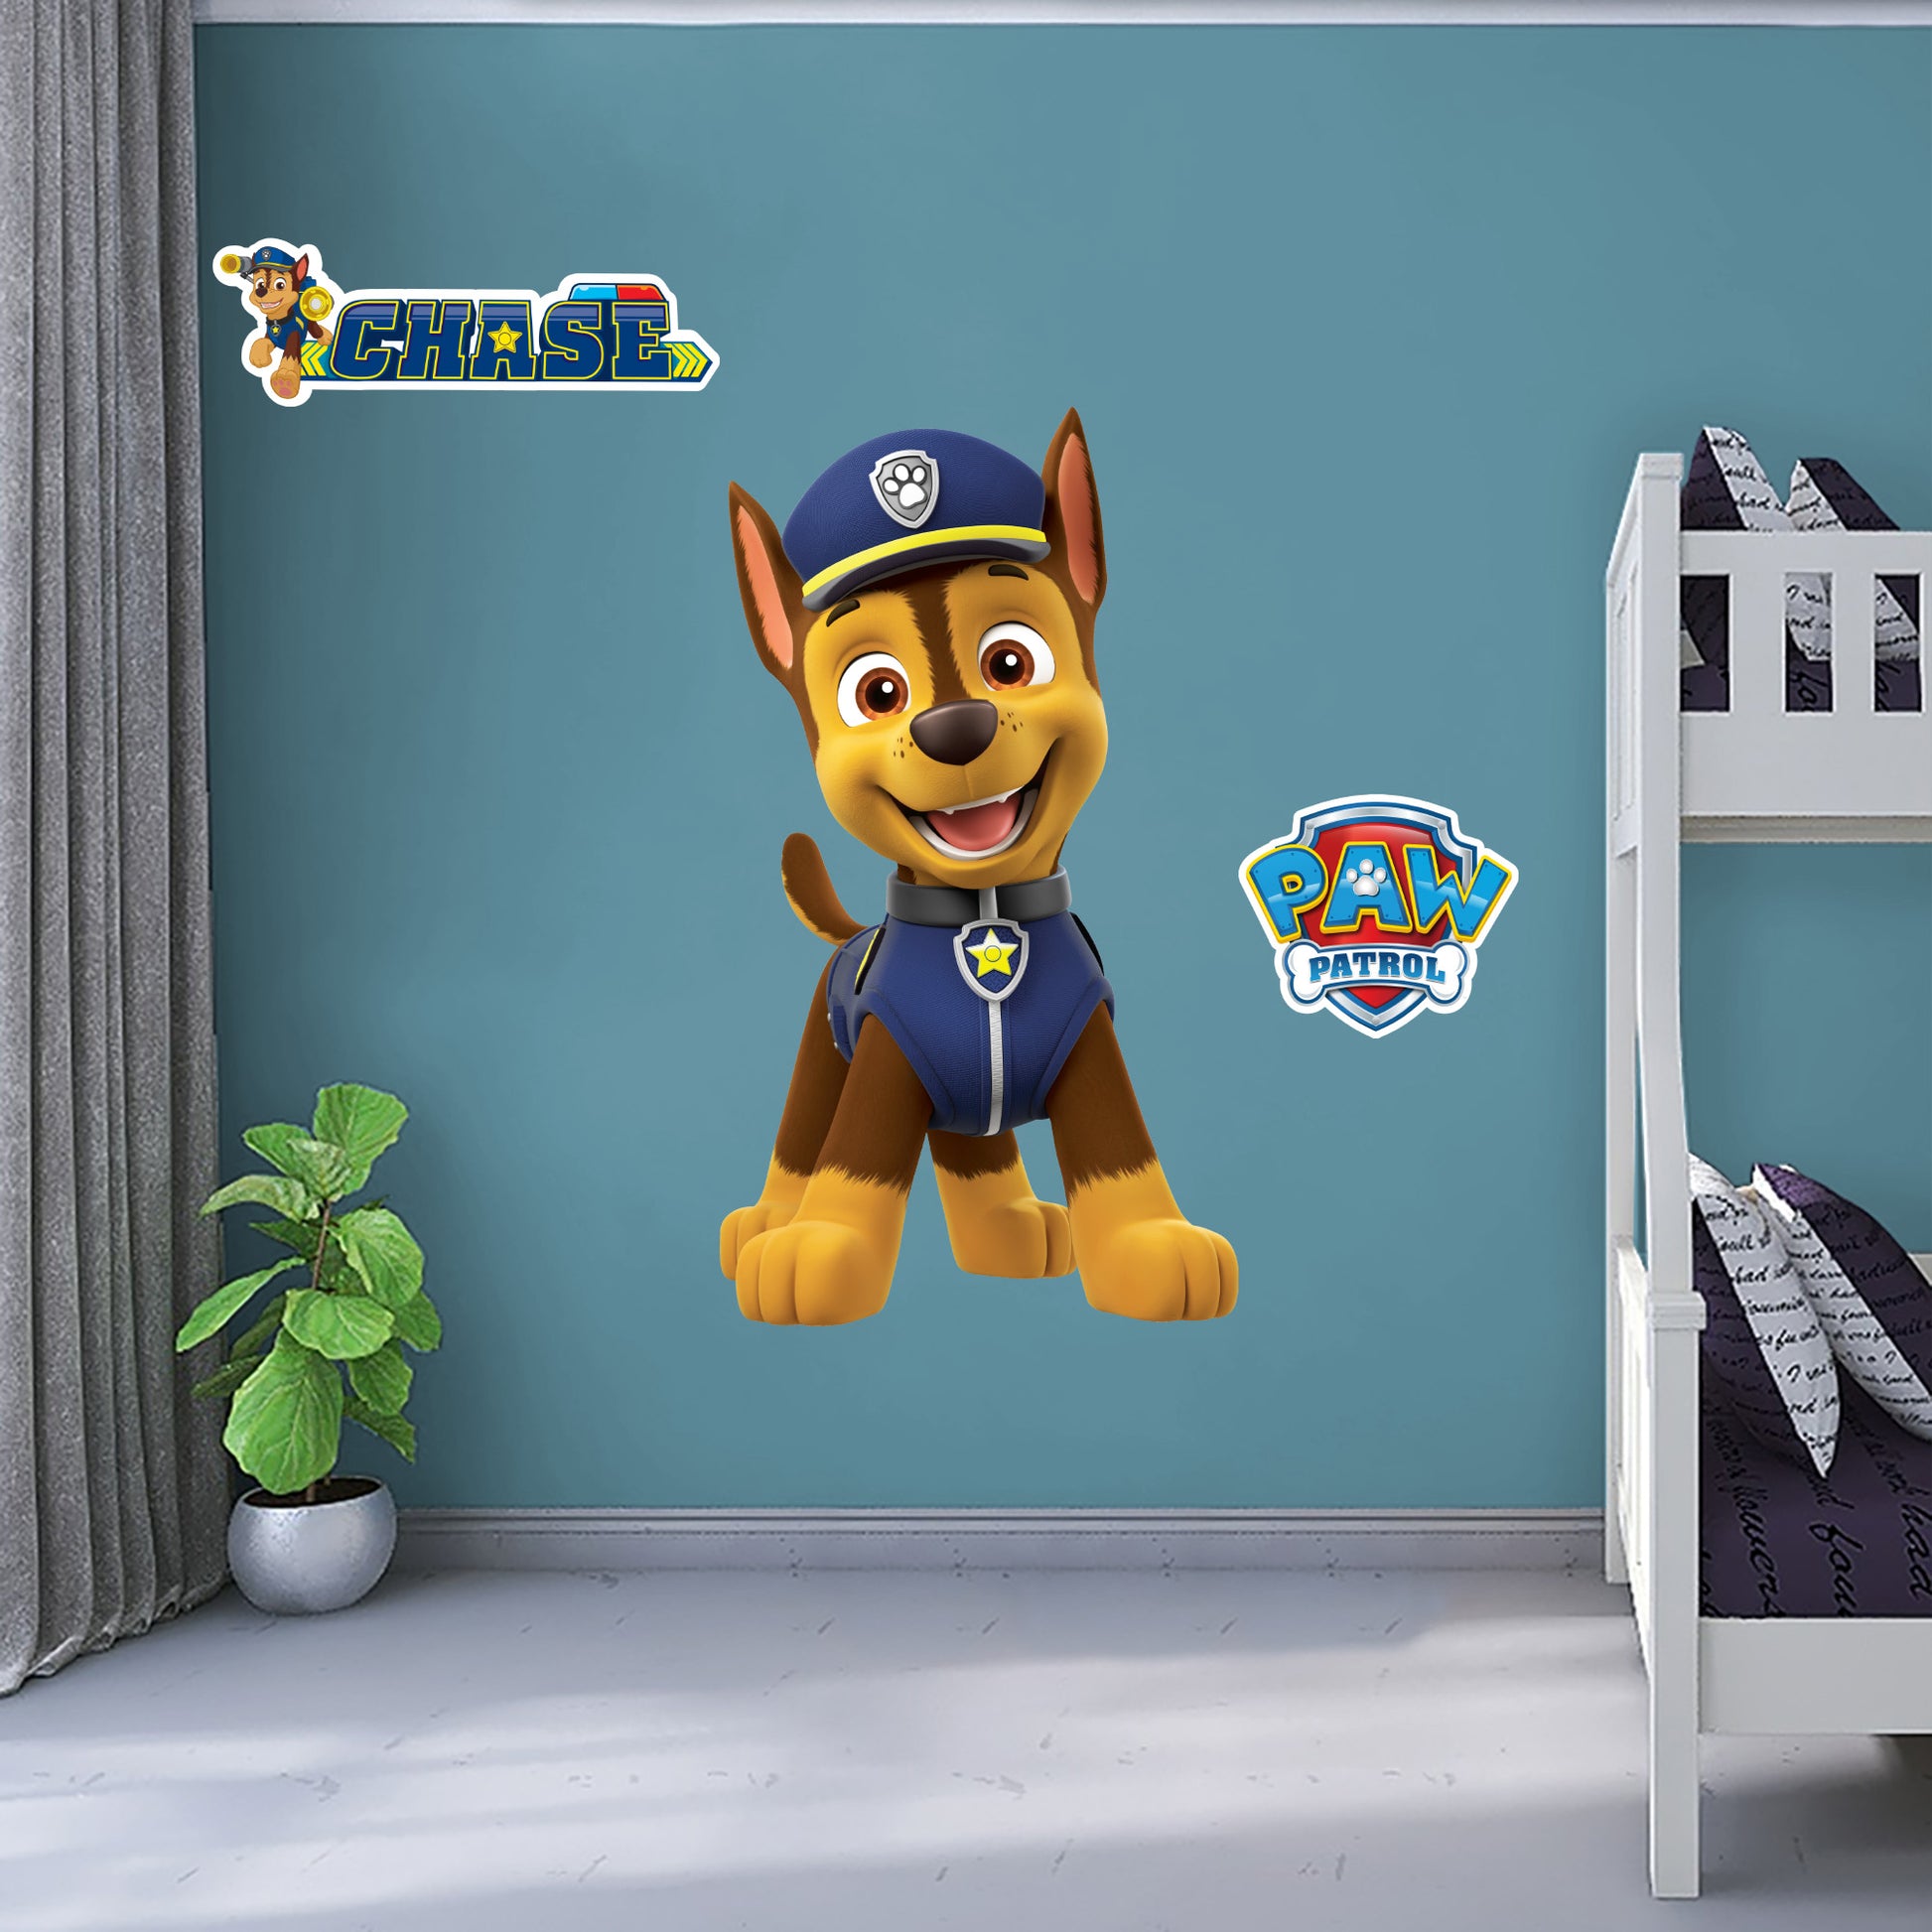 Paw Patrol: Zuma RealBig - Officially Licensed Nickelodeon